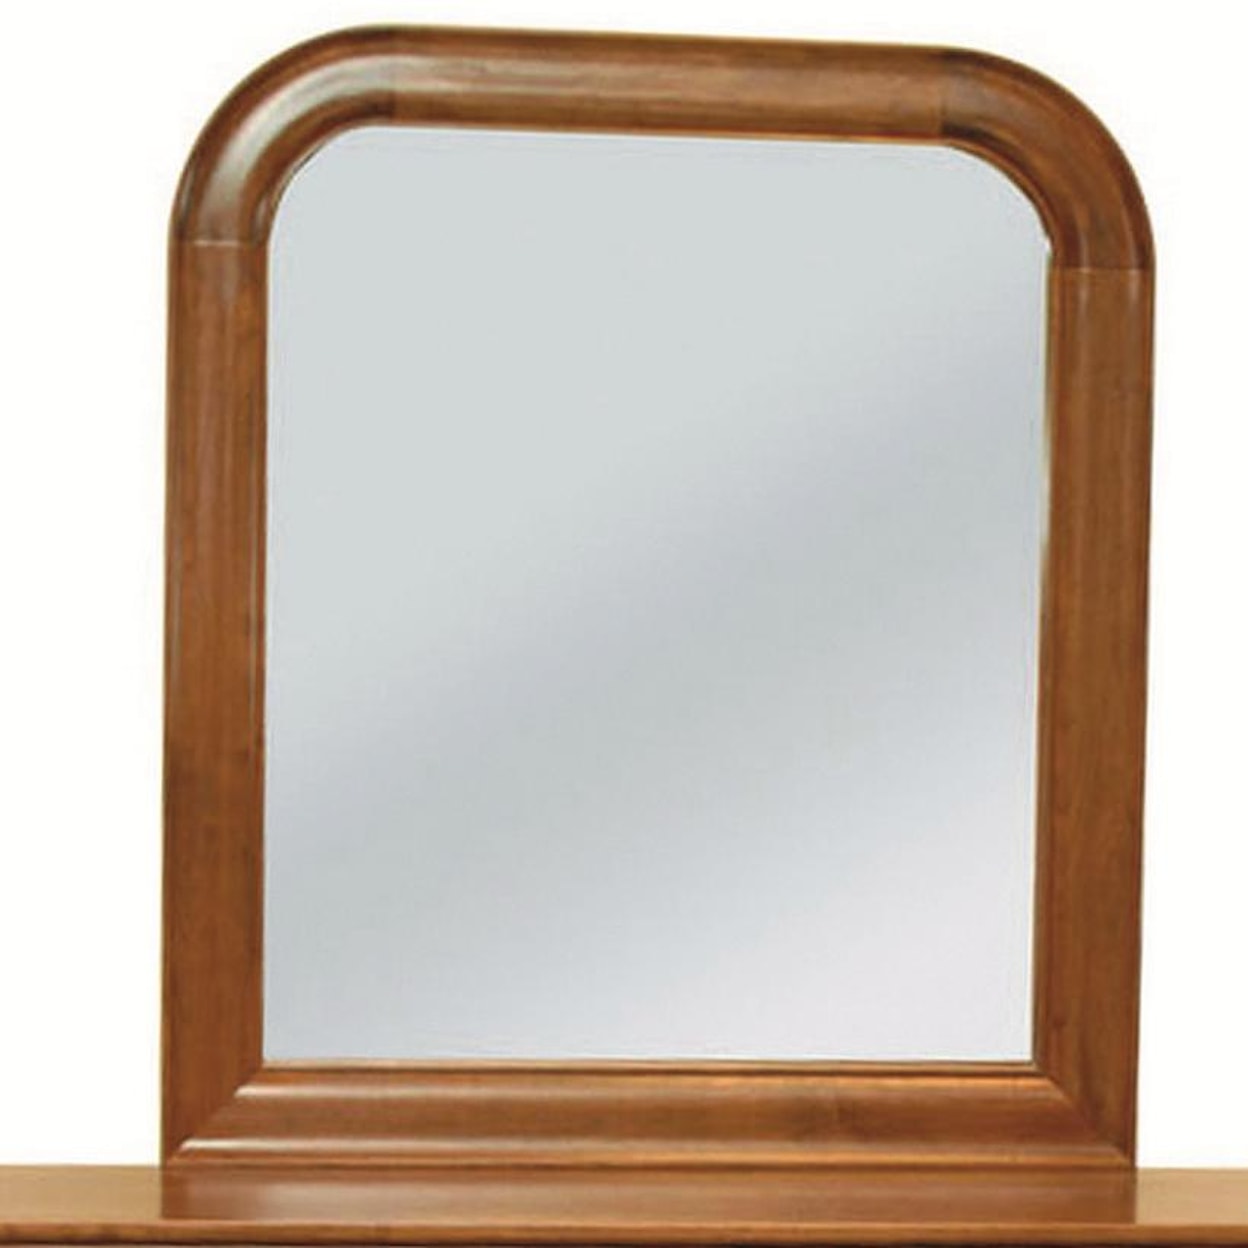 The Urban Collection Bordeaux Rounded Vertical Mirror